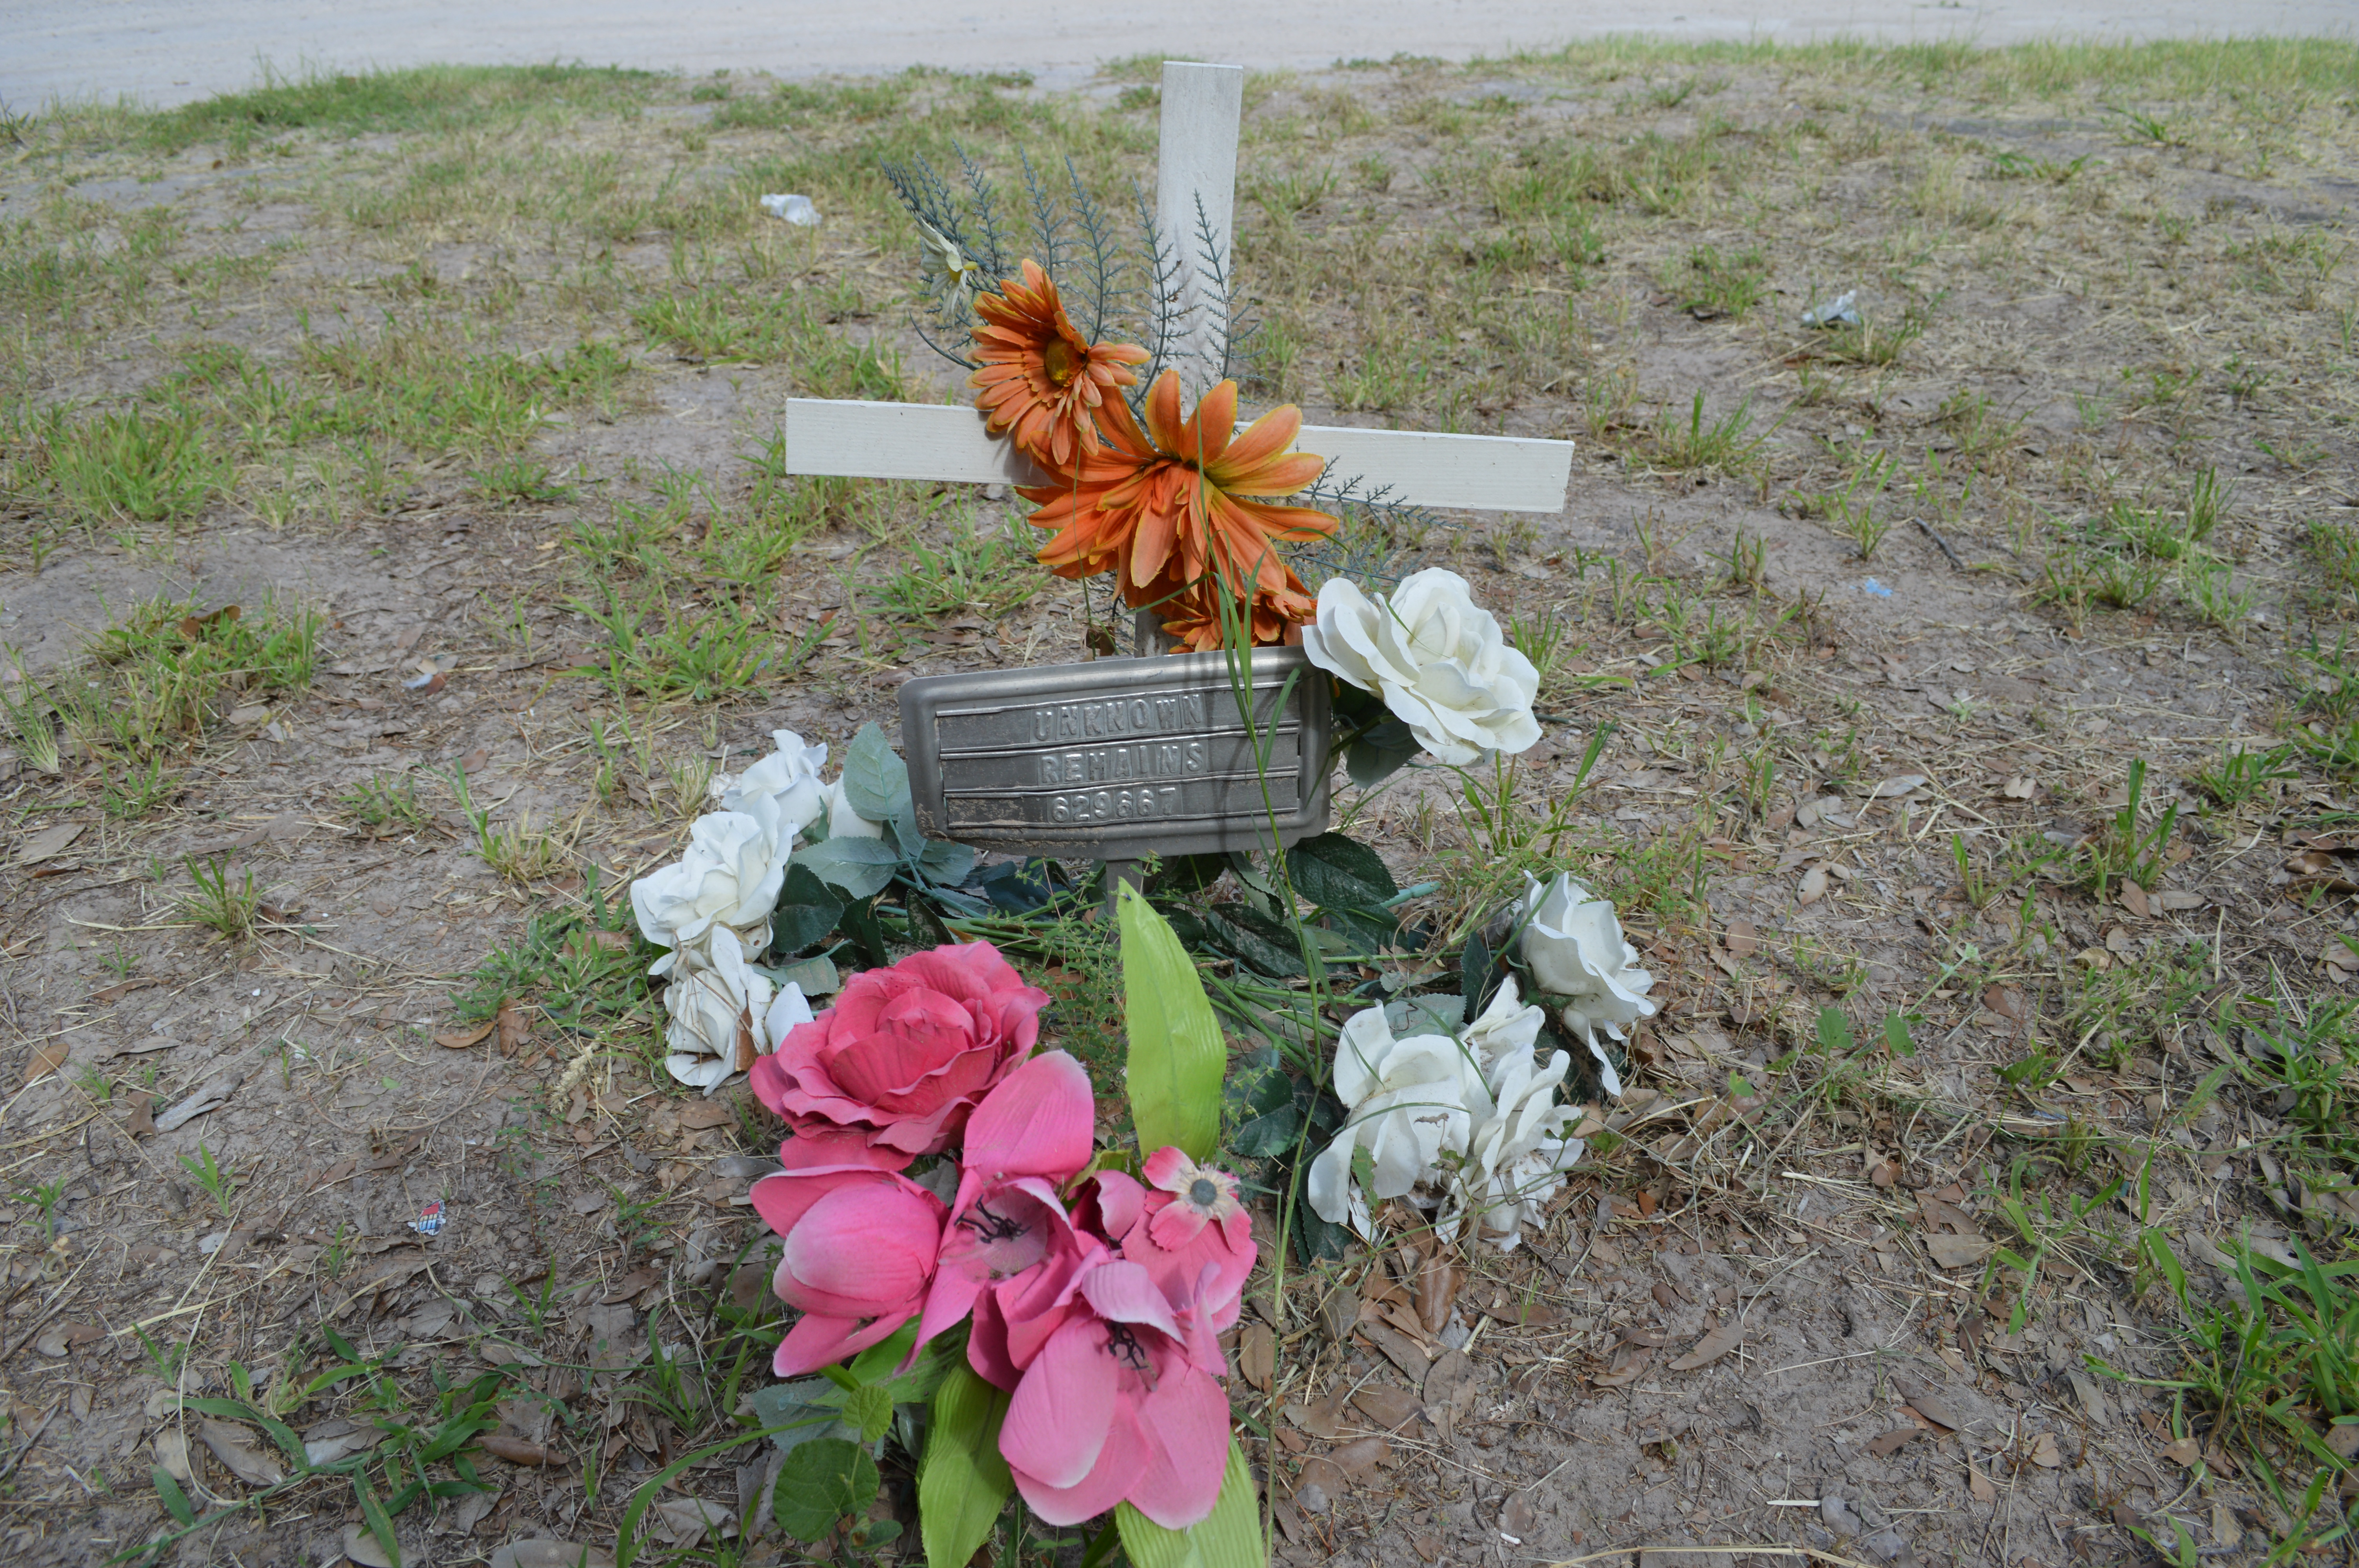 A cemetery marker labeled unknown remains with a white cross and colorful flowers added